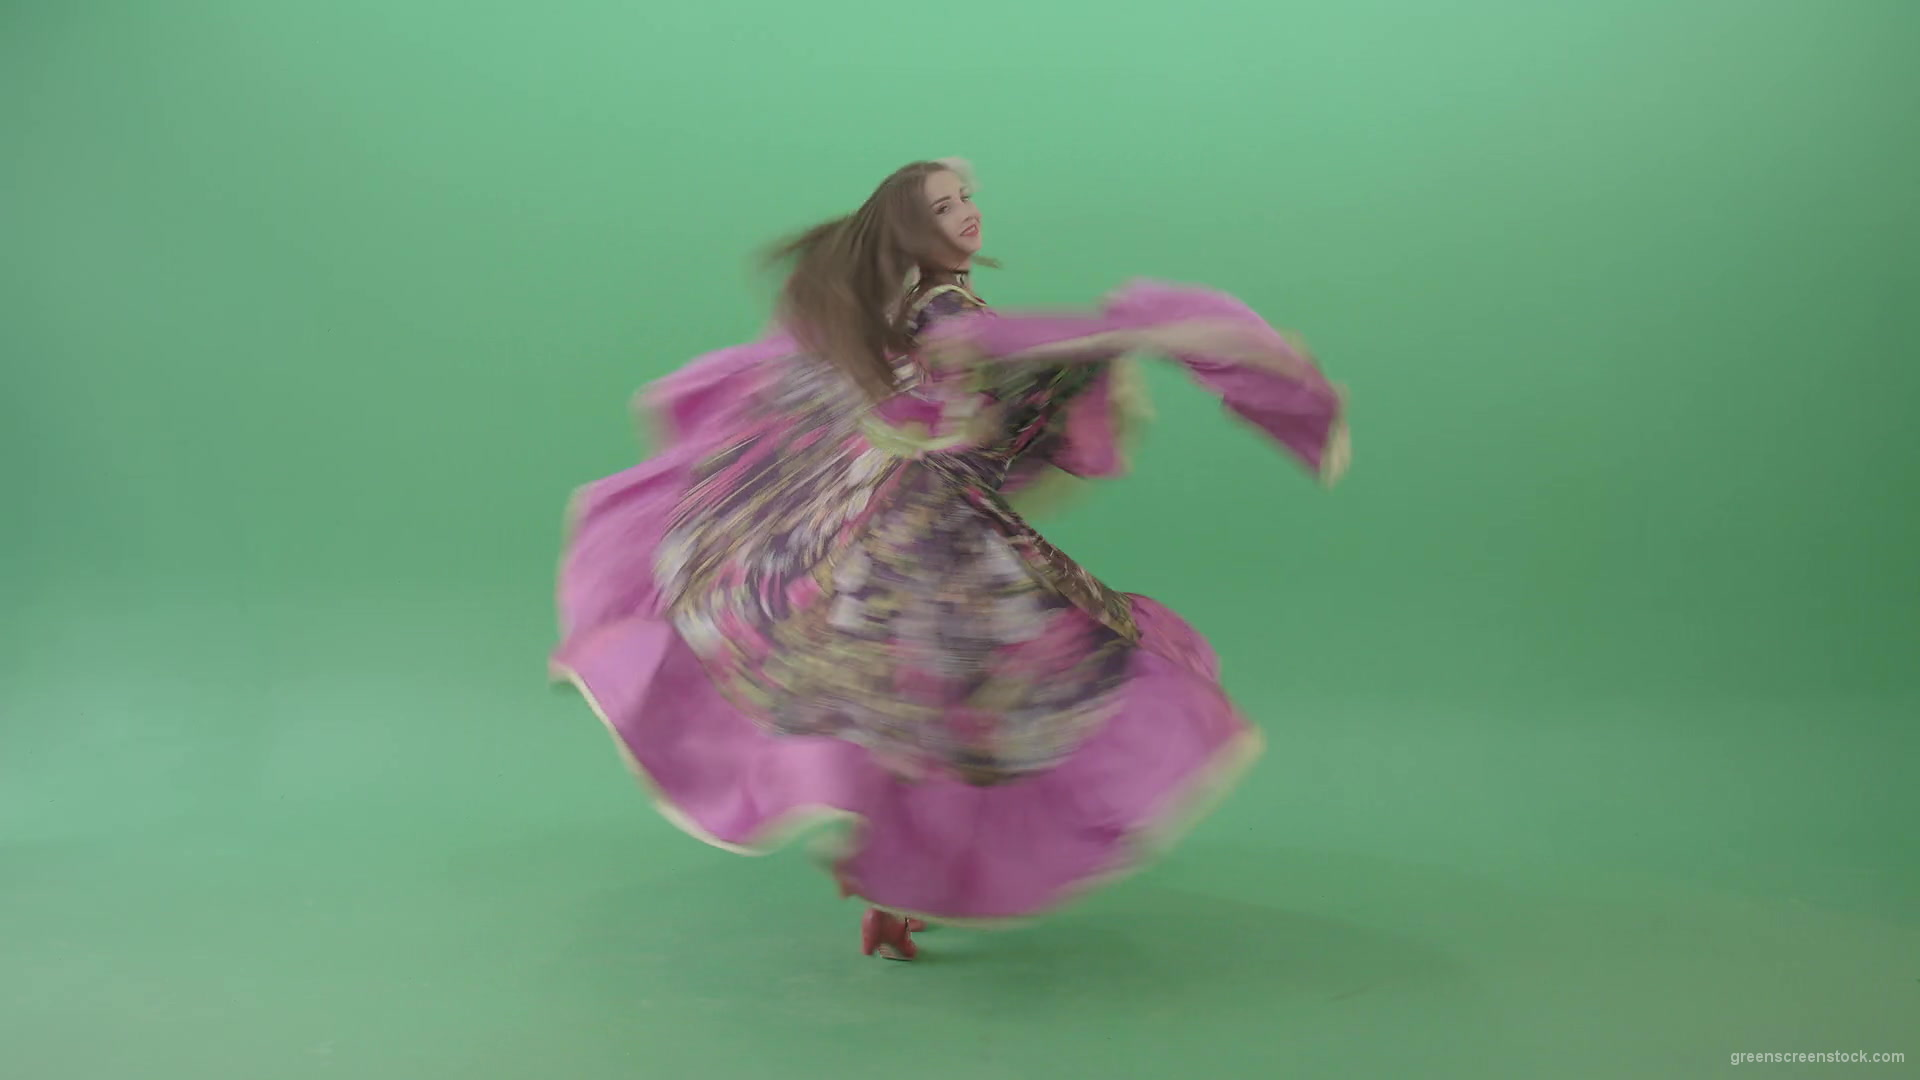 Romatic-moldova-girl-dancing-in-roma-gypsy-dress-isolated-on-green-screen-4K-stock-video-footage-1920_006 Green Screen Stock